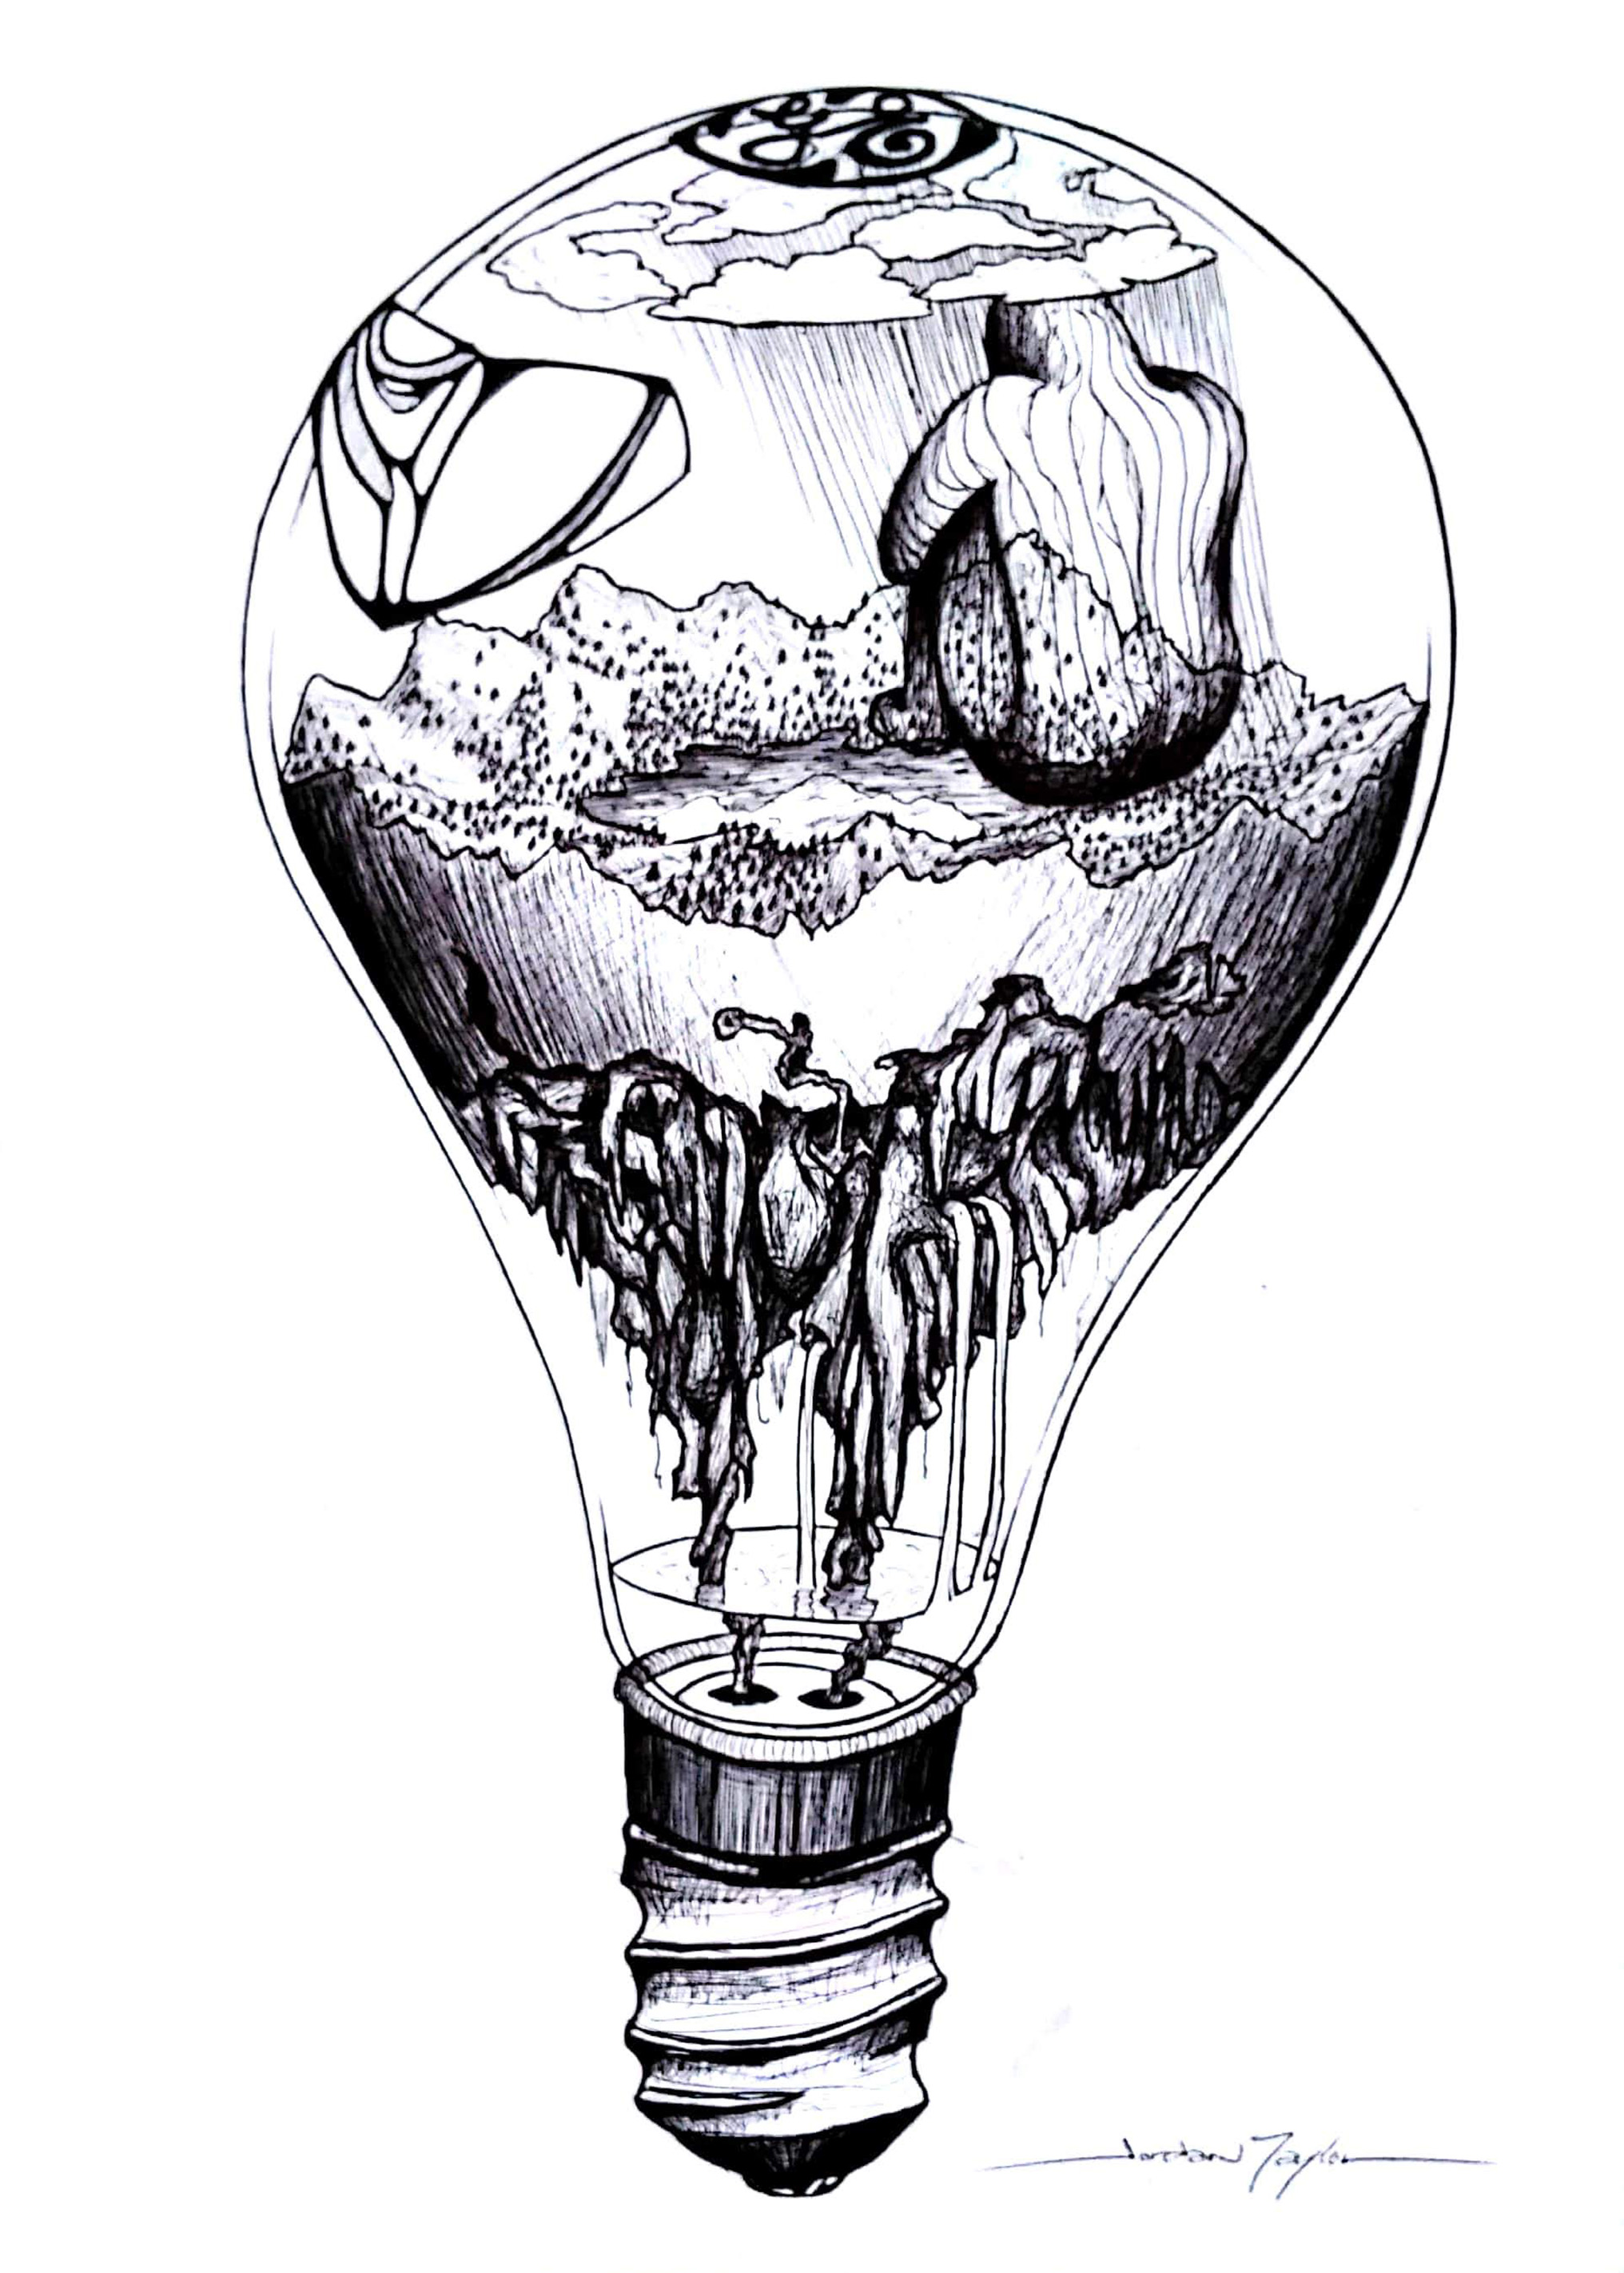 A large light bulb containing a shadow sulking in the rain of a tiny world.